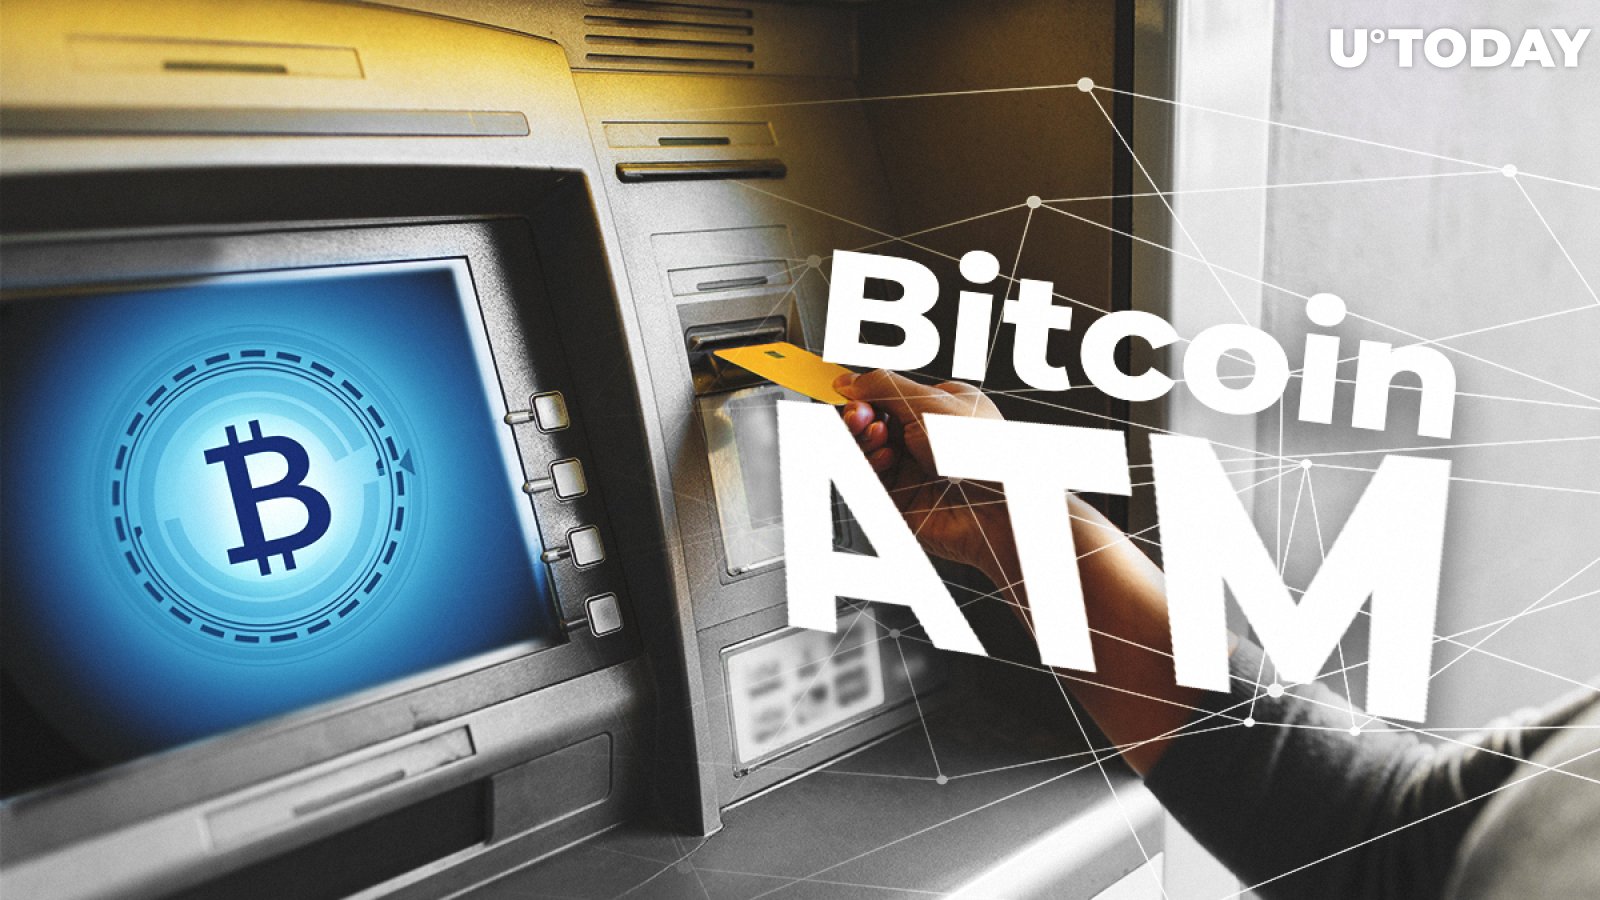 Bitcoin ATM — How to Use Guide [Find, Buy or Sell]